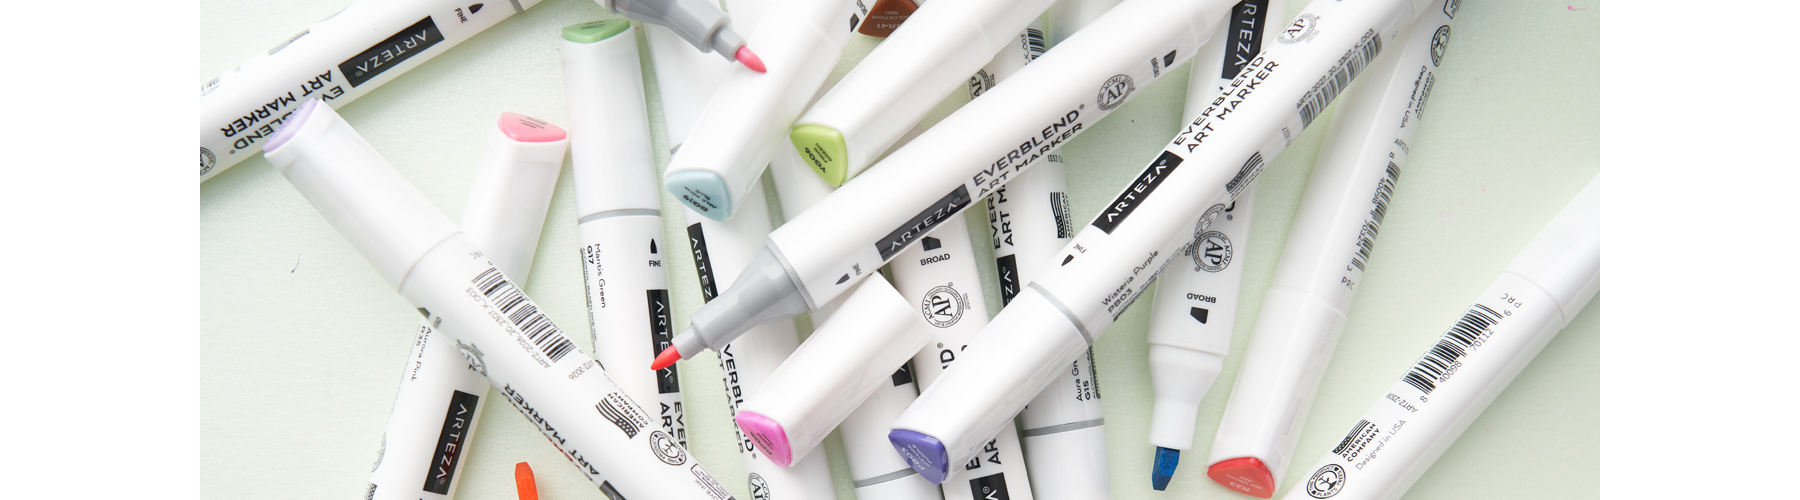 More Markers? Arteza Everblend Marker Review – The Frugal Crafter Blog